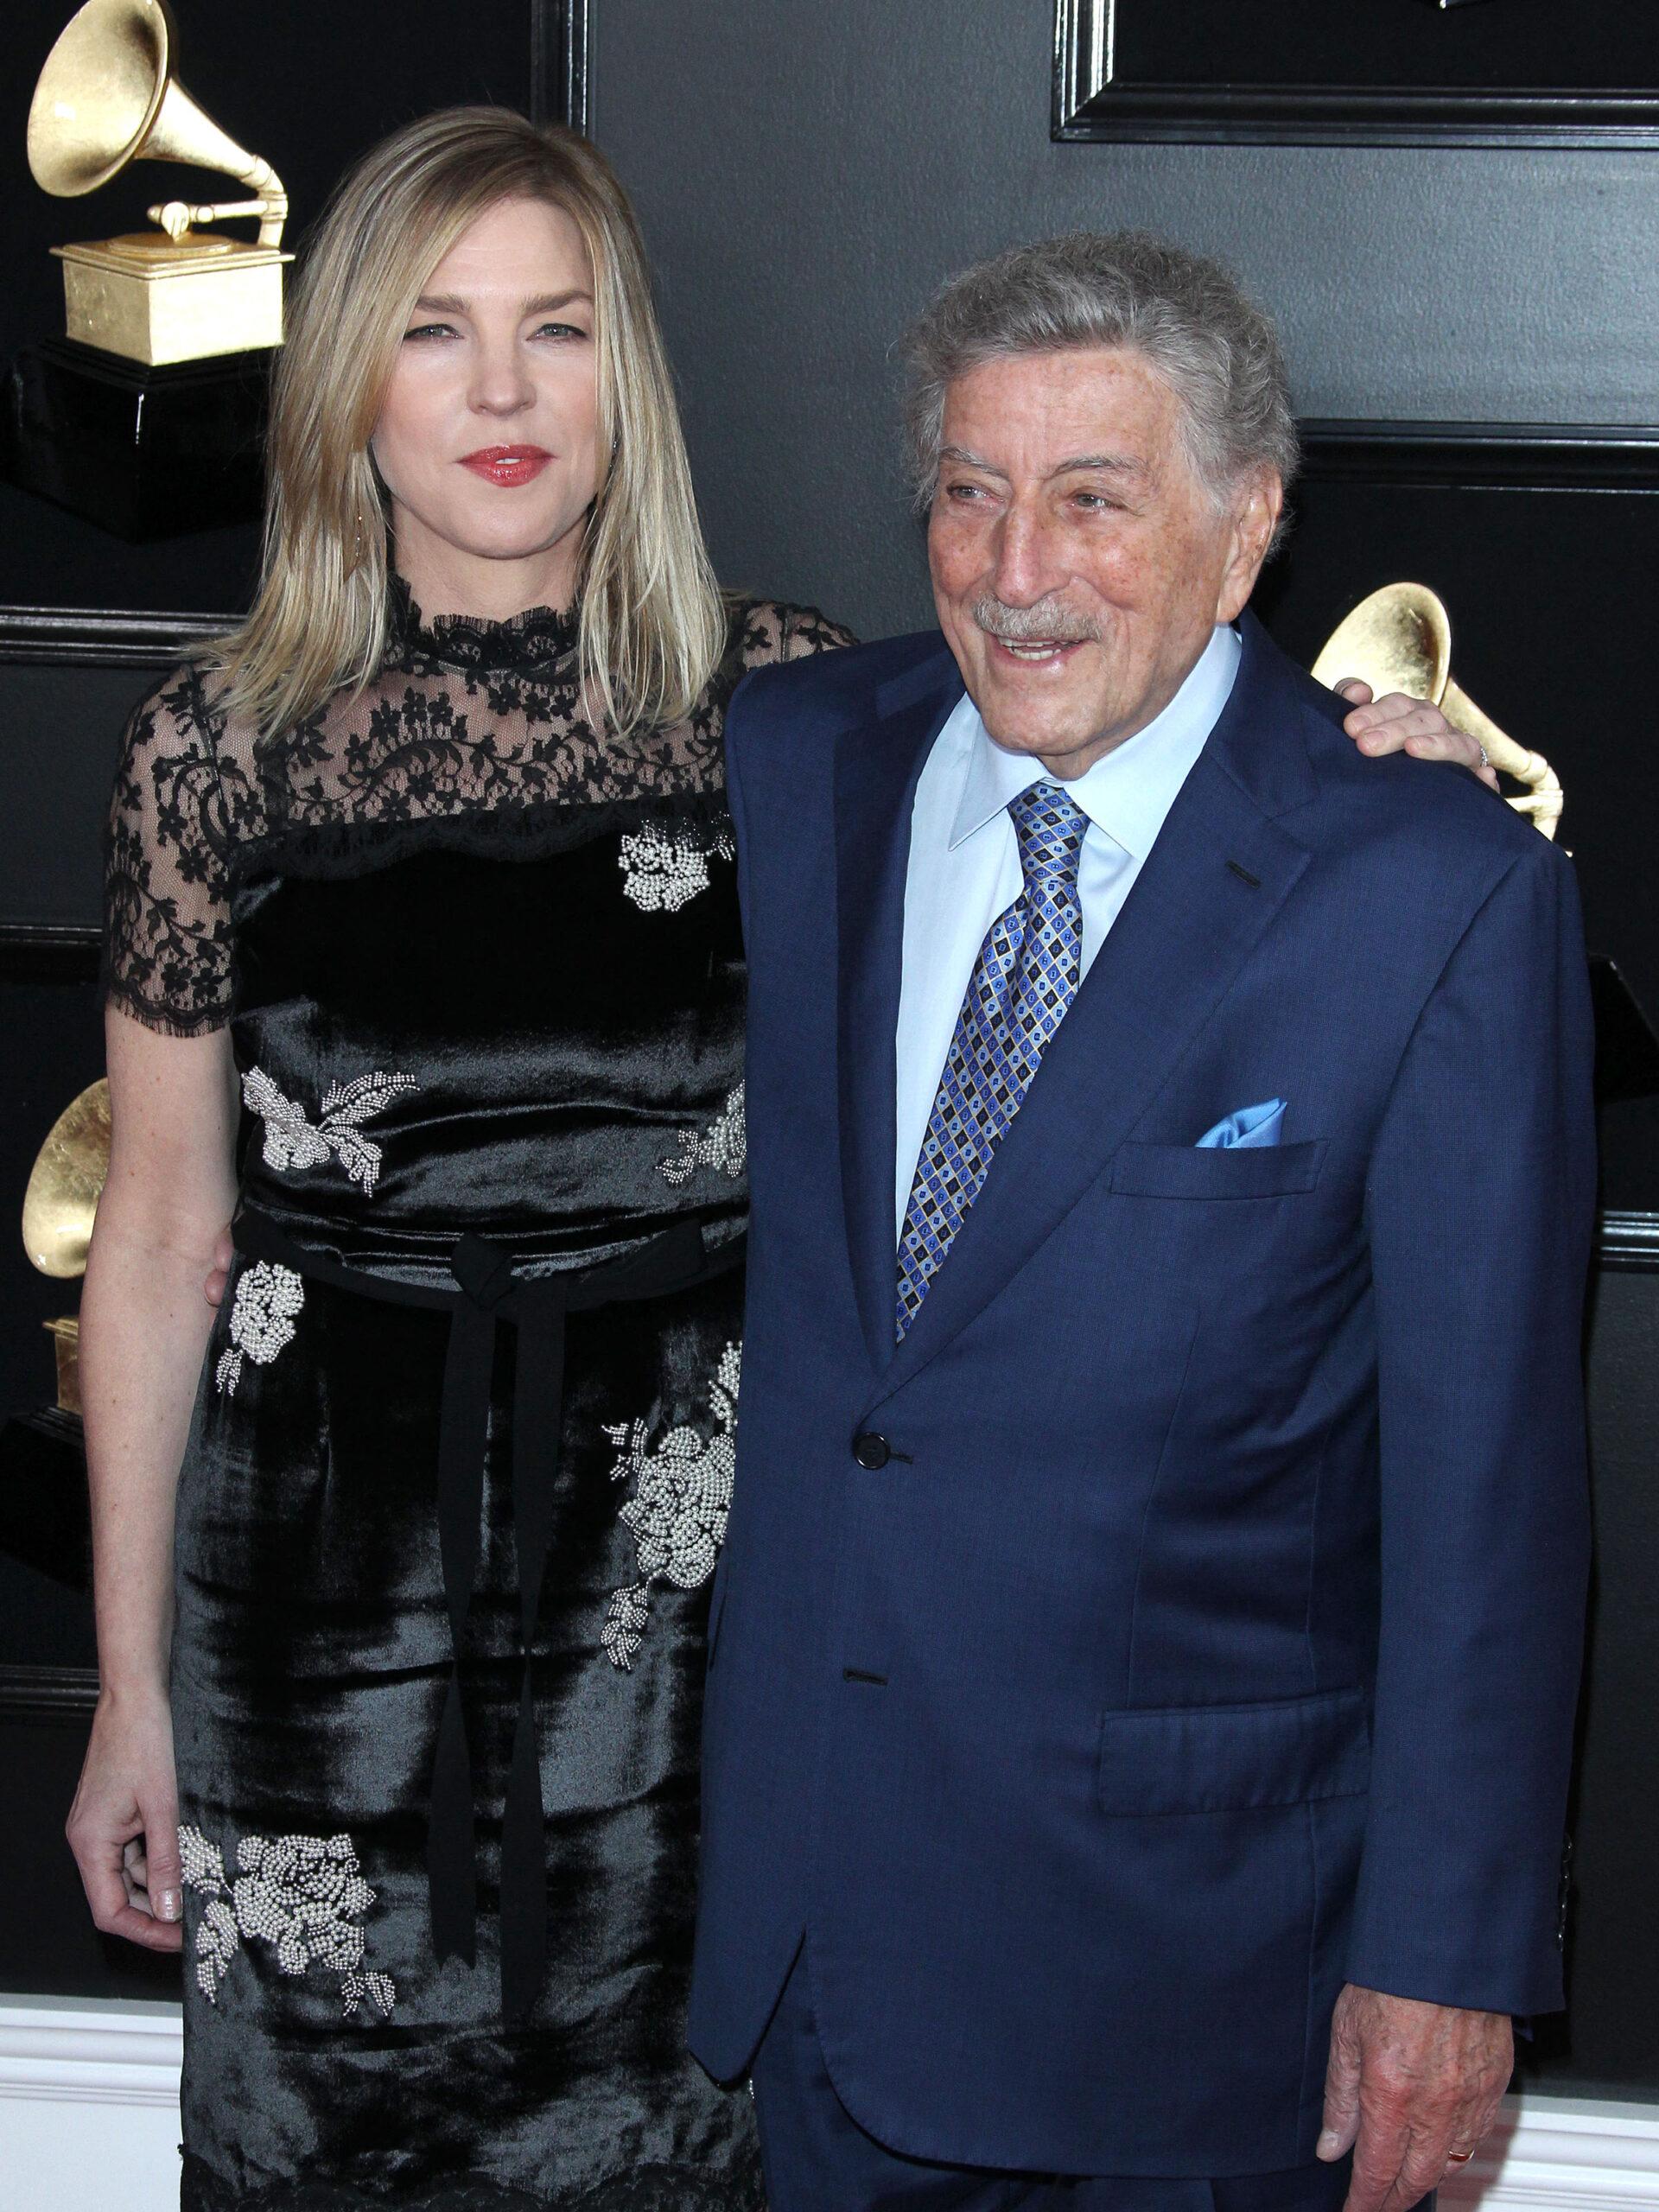 Tony Bennett and Diana Krall at the 61st Annual Grammy Awards - Arrivals